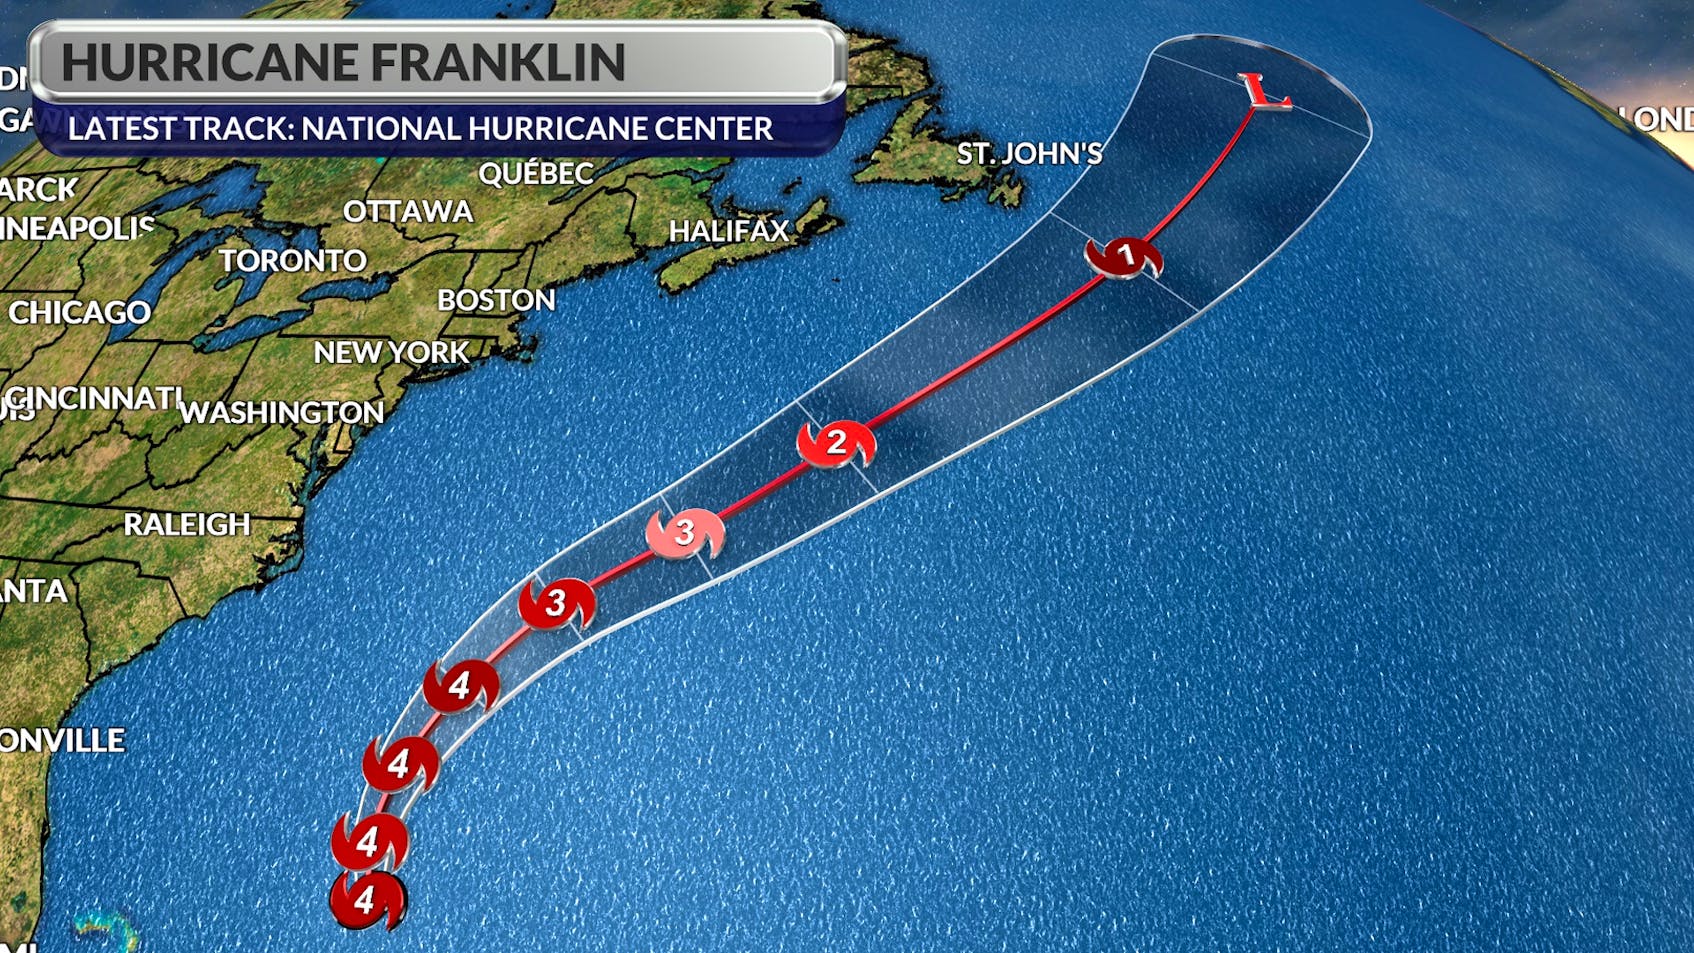 Franklin tracking south of Avalon season’s first major storm may bring